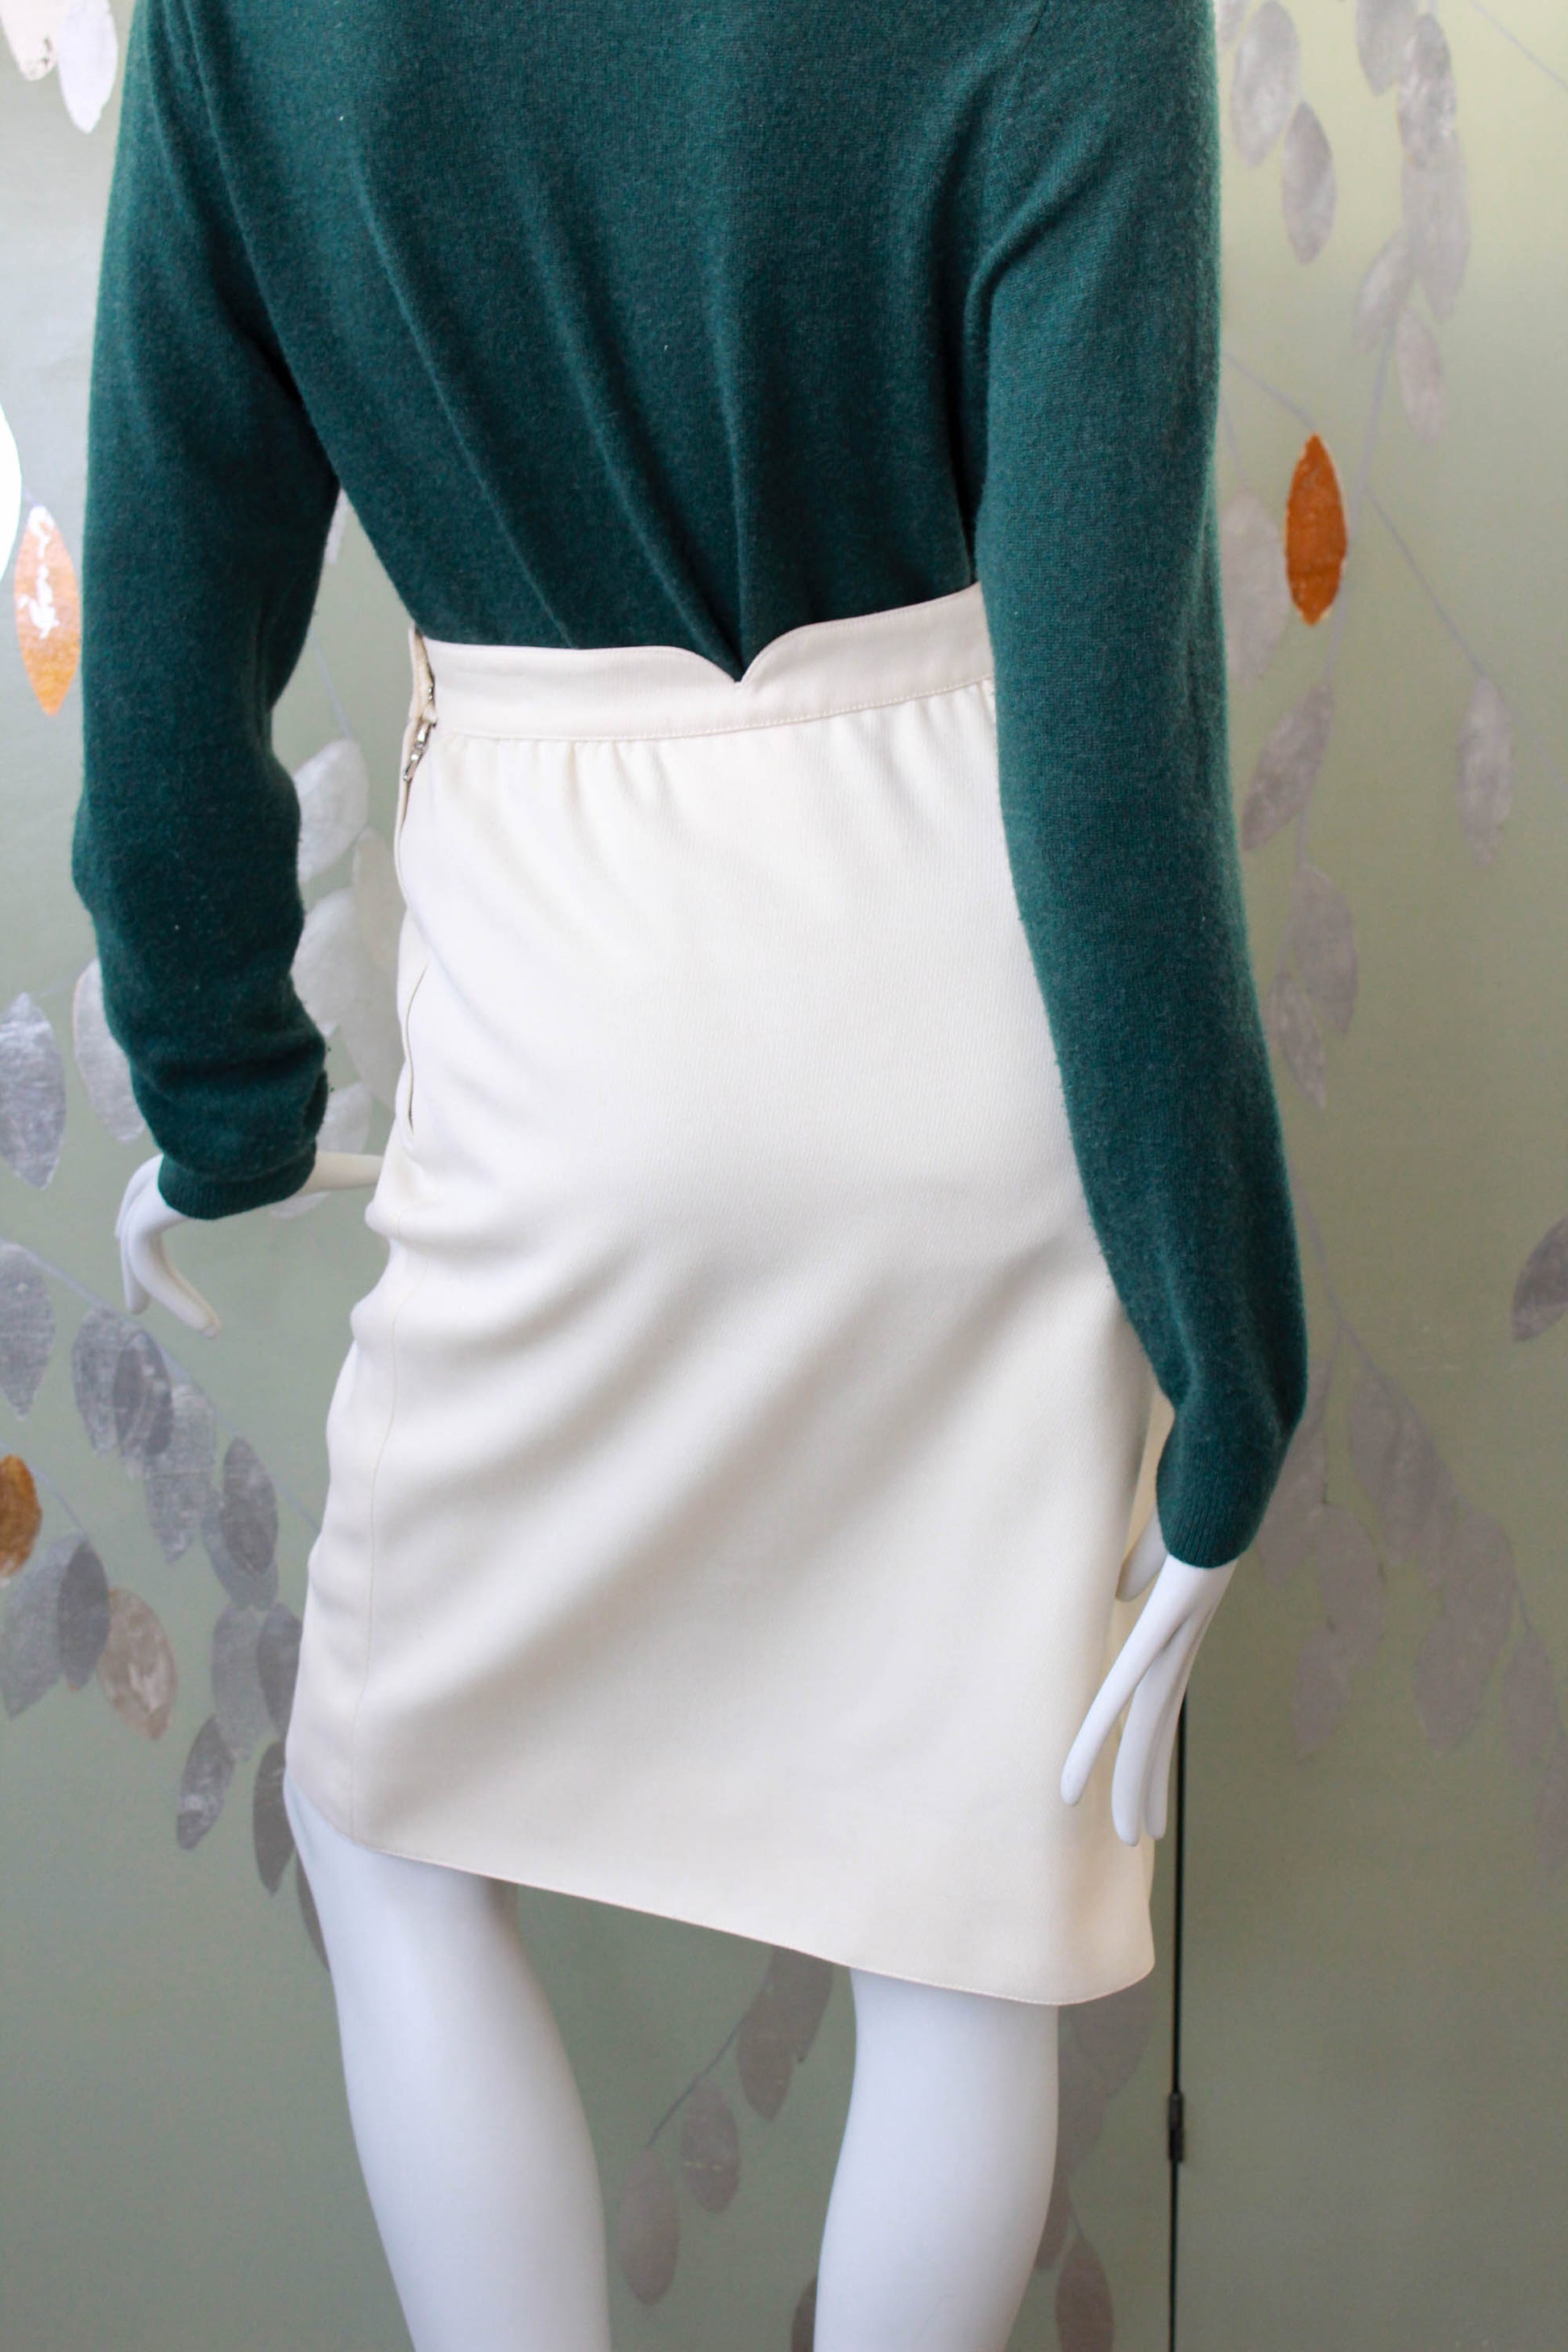 vintage courrèges cream wool pencil skirt with front flapped pockets, curved waistband with V cut out, mod 1960s style designer skirt made in france